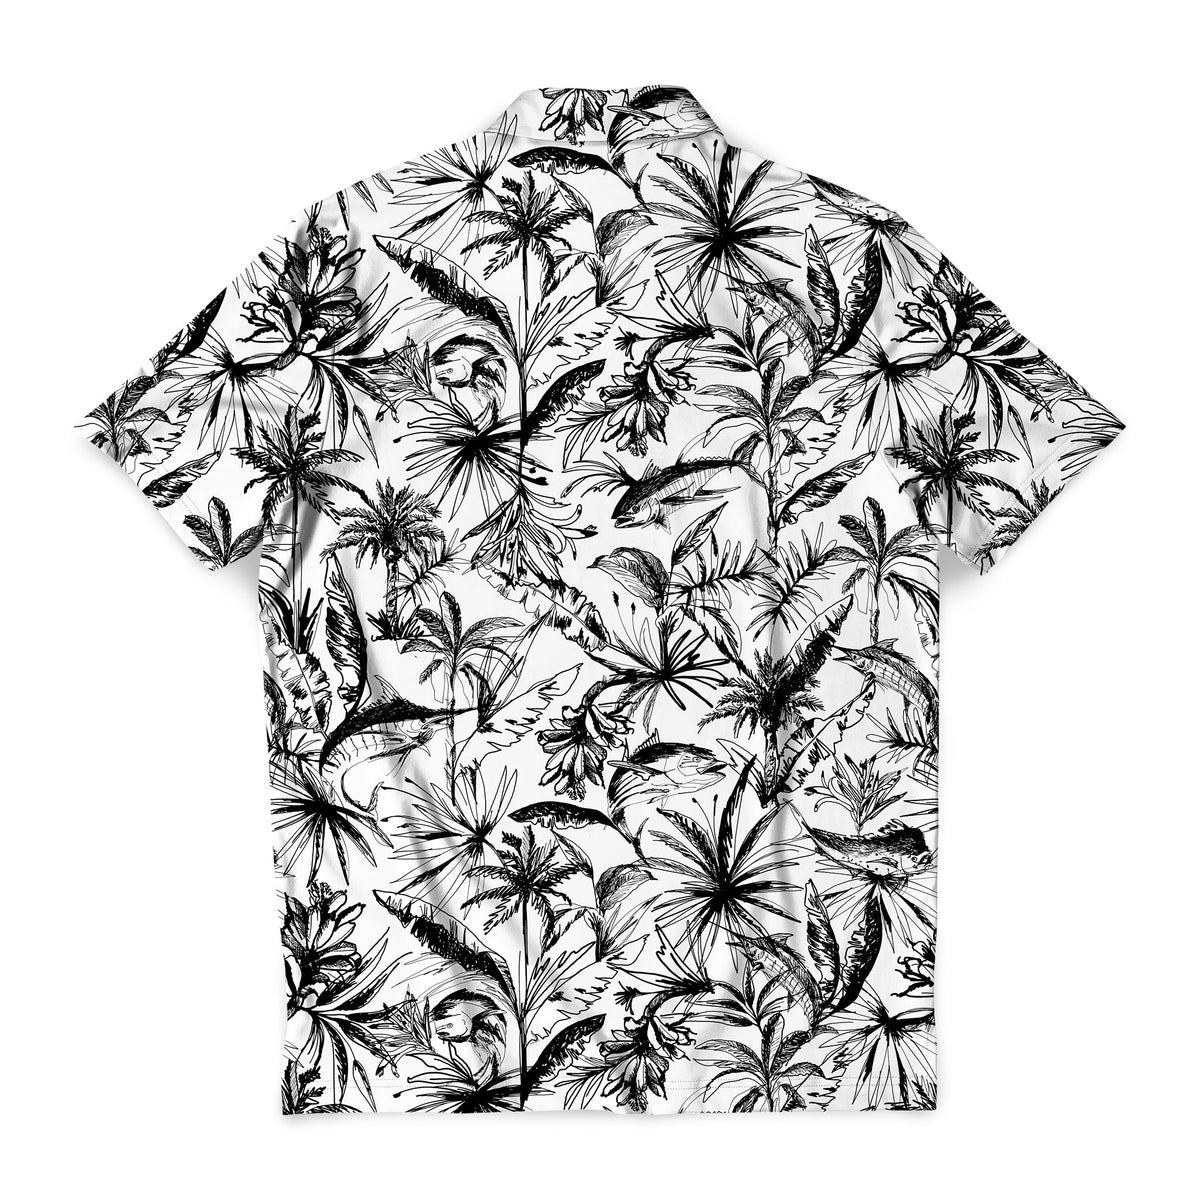 SCALES Loose Lines Polo